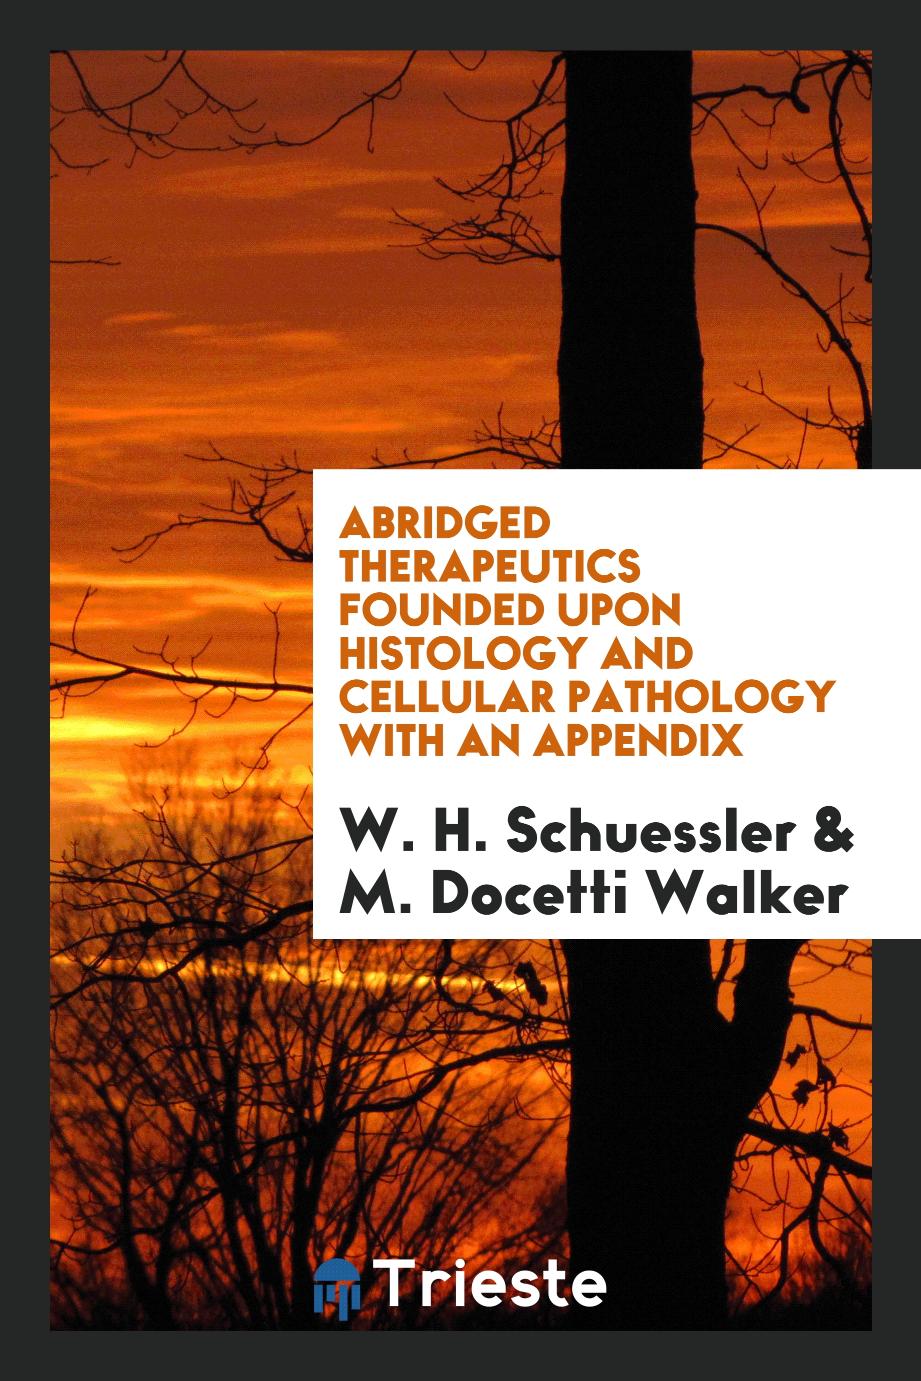 Abridged Therapeutics Founded Upon Histology and Cellular Pathology with an Appendix